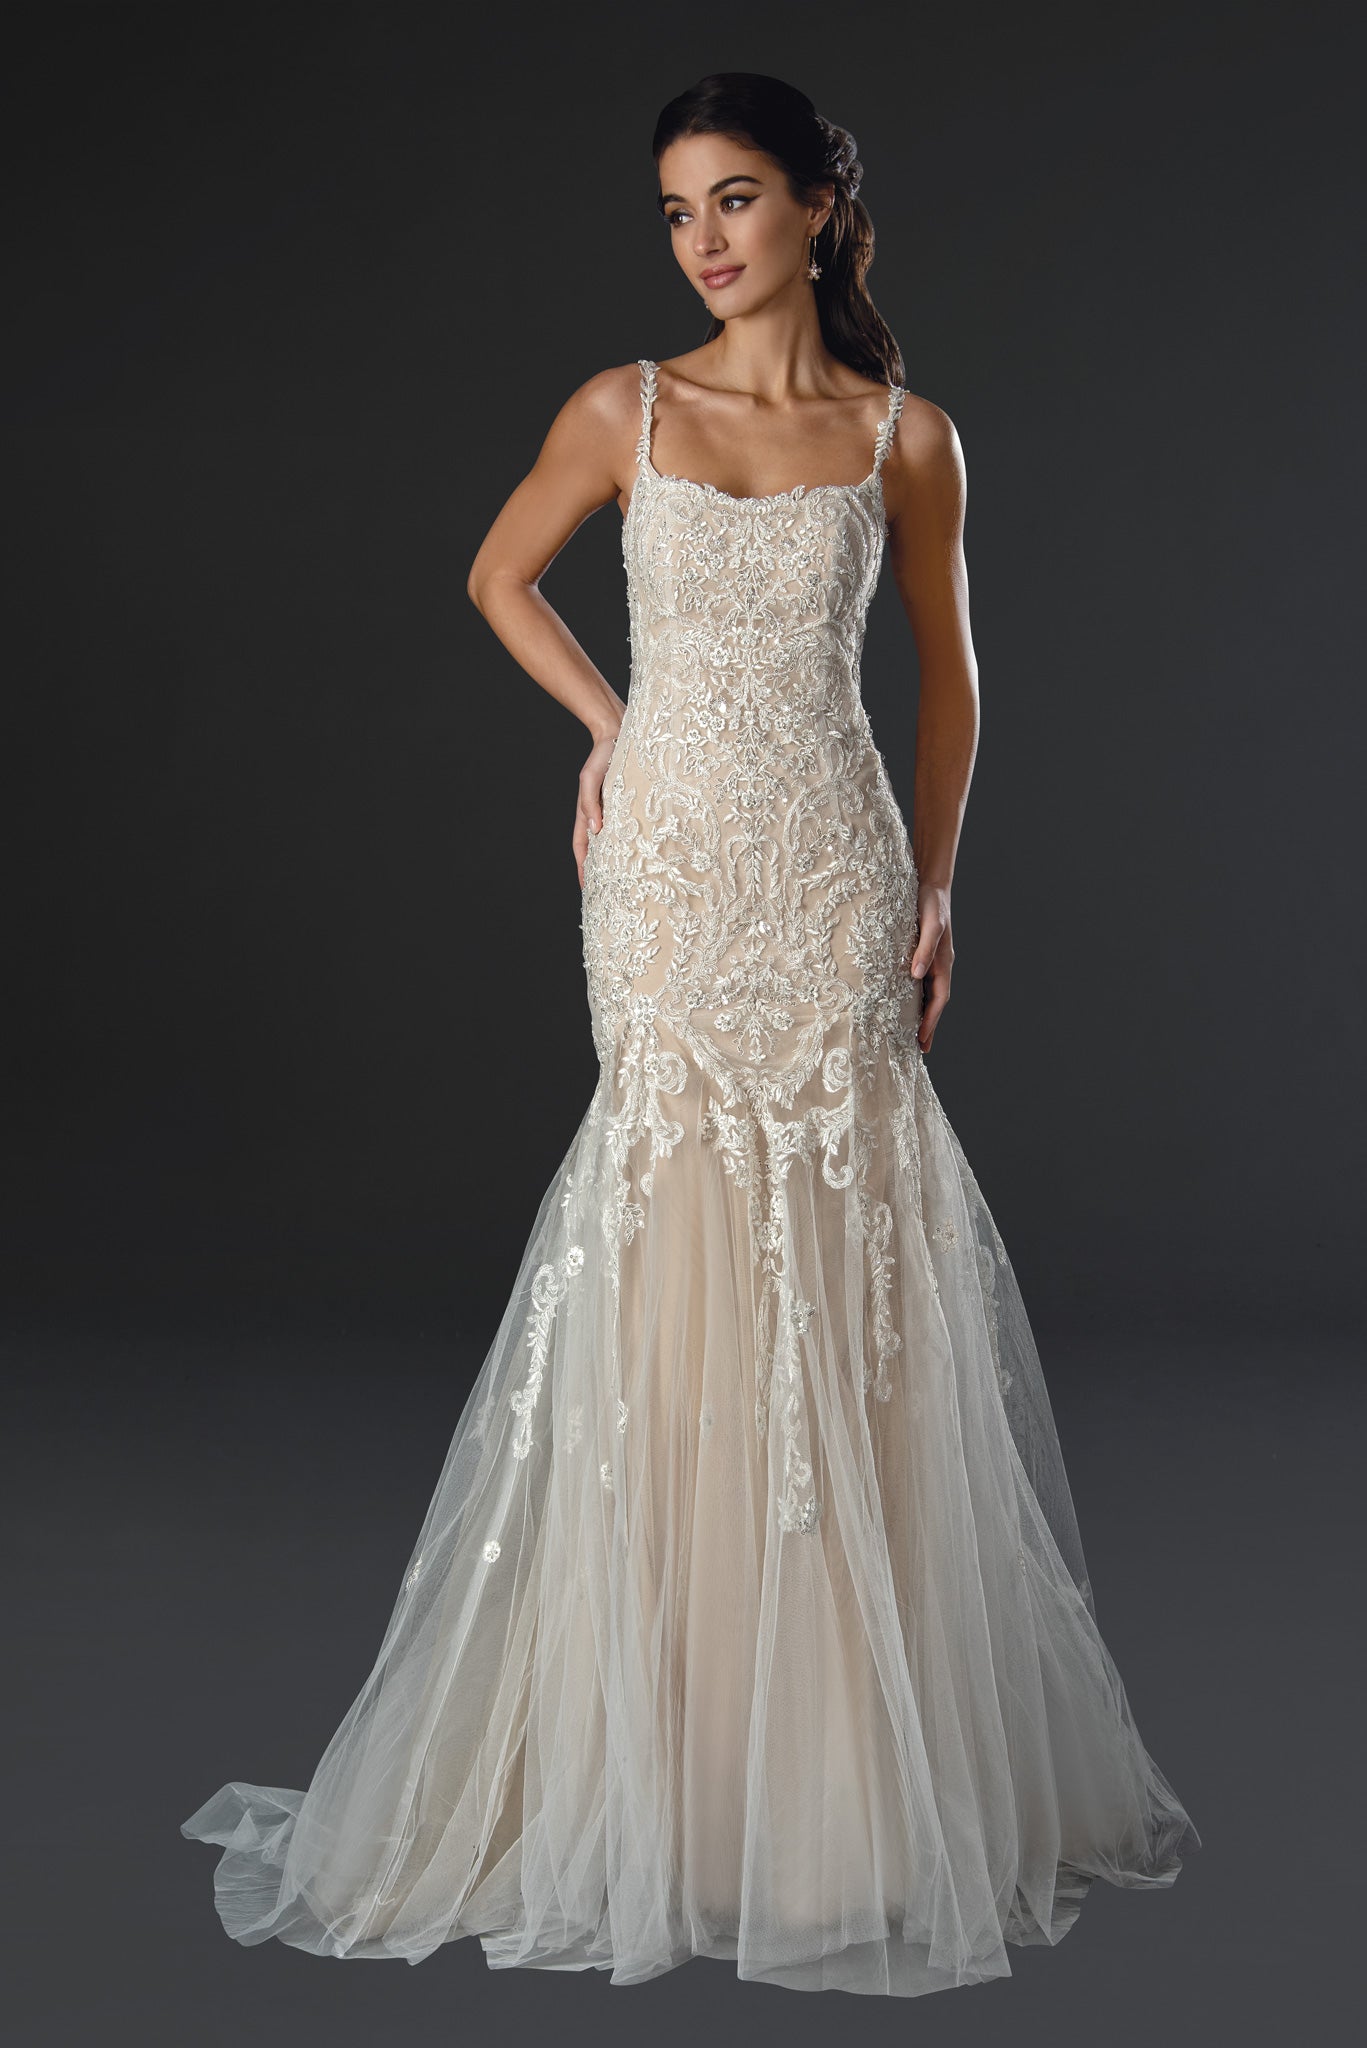 Stella Couture 22571 Long Beaded Lace Scoop Neck Wedding Dress Mermaid Bridal Gown Buttons Sizes: 0-28  Colors: Ivory, Nude